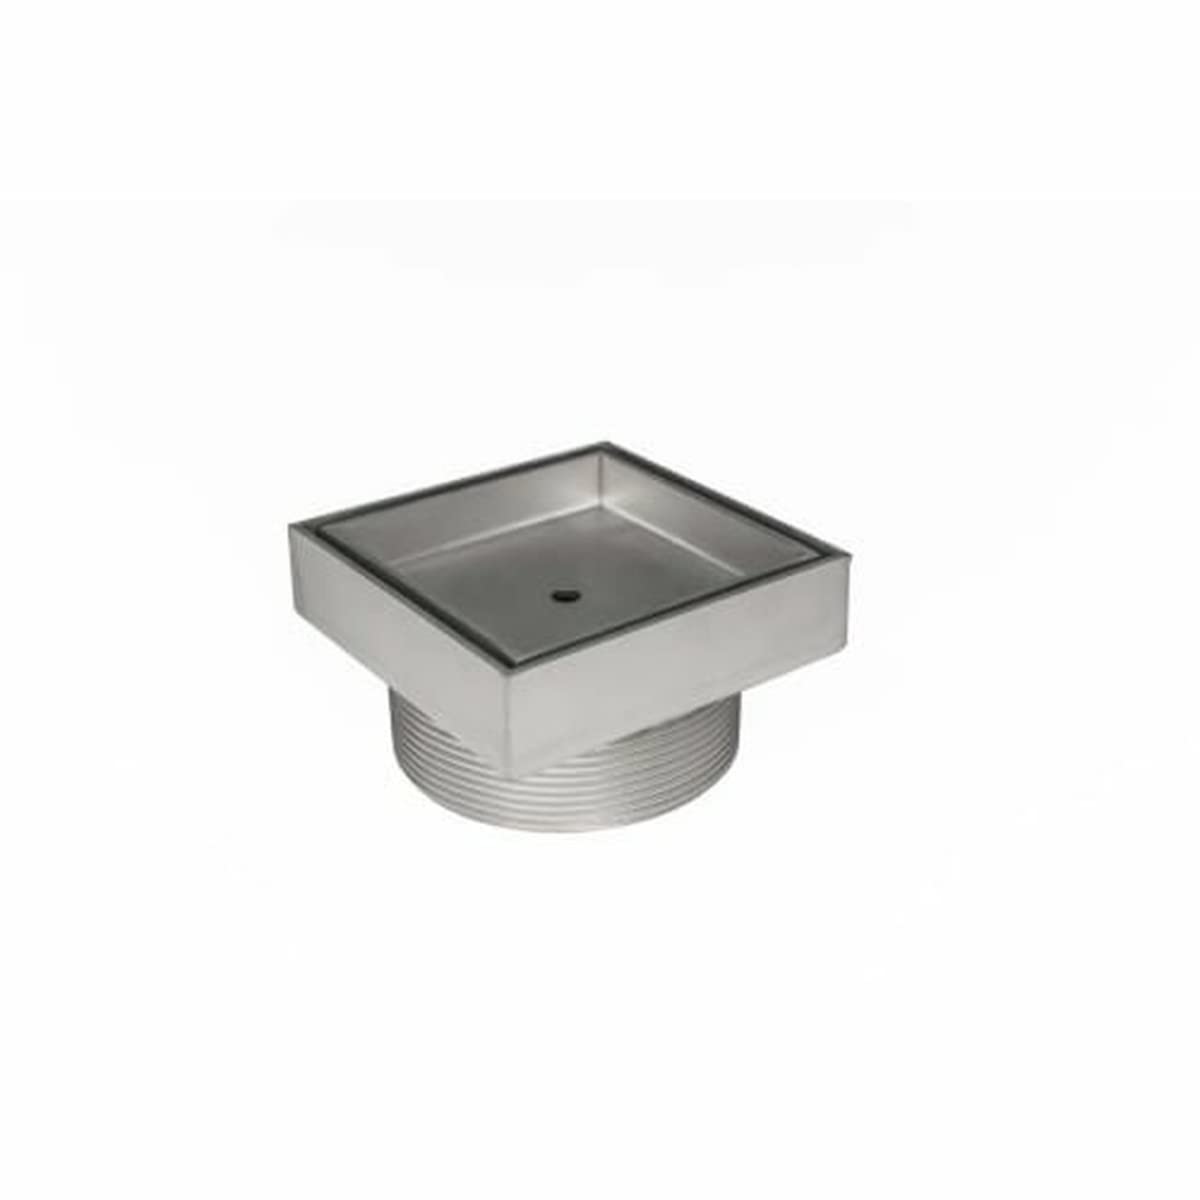 Infinity Drain TD 15-2I SS TD 15 Kit w/Cast Iron Drain Body 2" Outlet in Satin Stainless